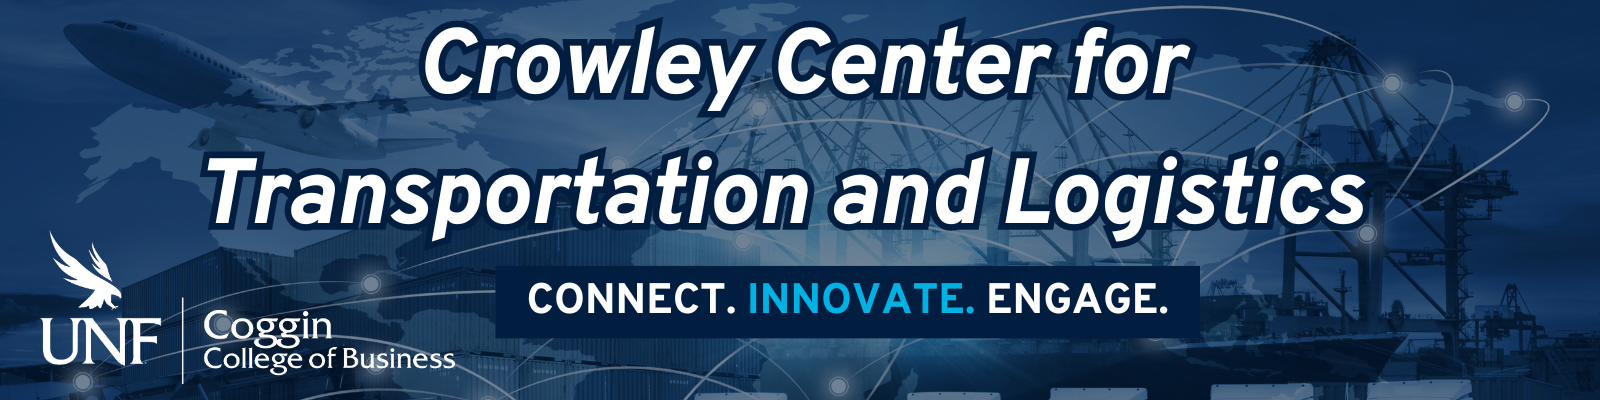 Crowley Center for Transportation and Logistics Connect Innovate Engage UNF Coggin College of Business